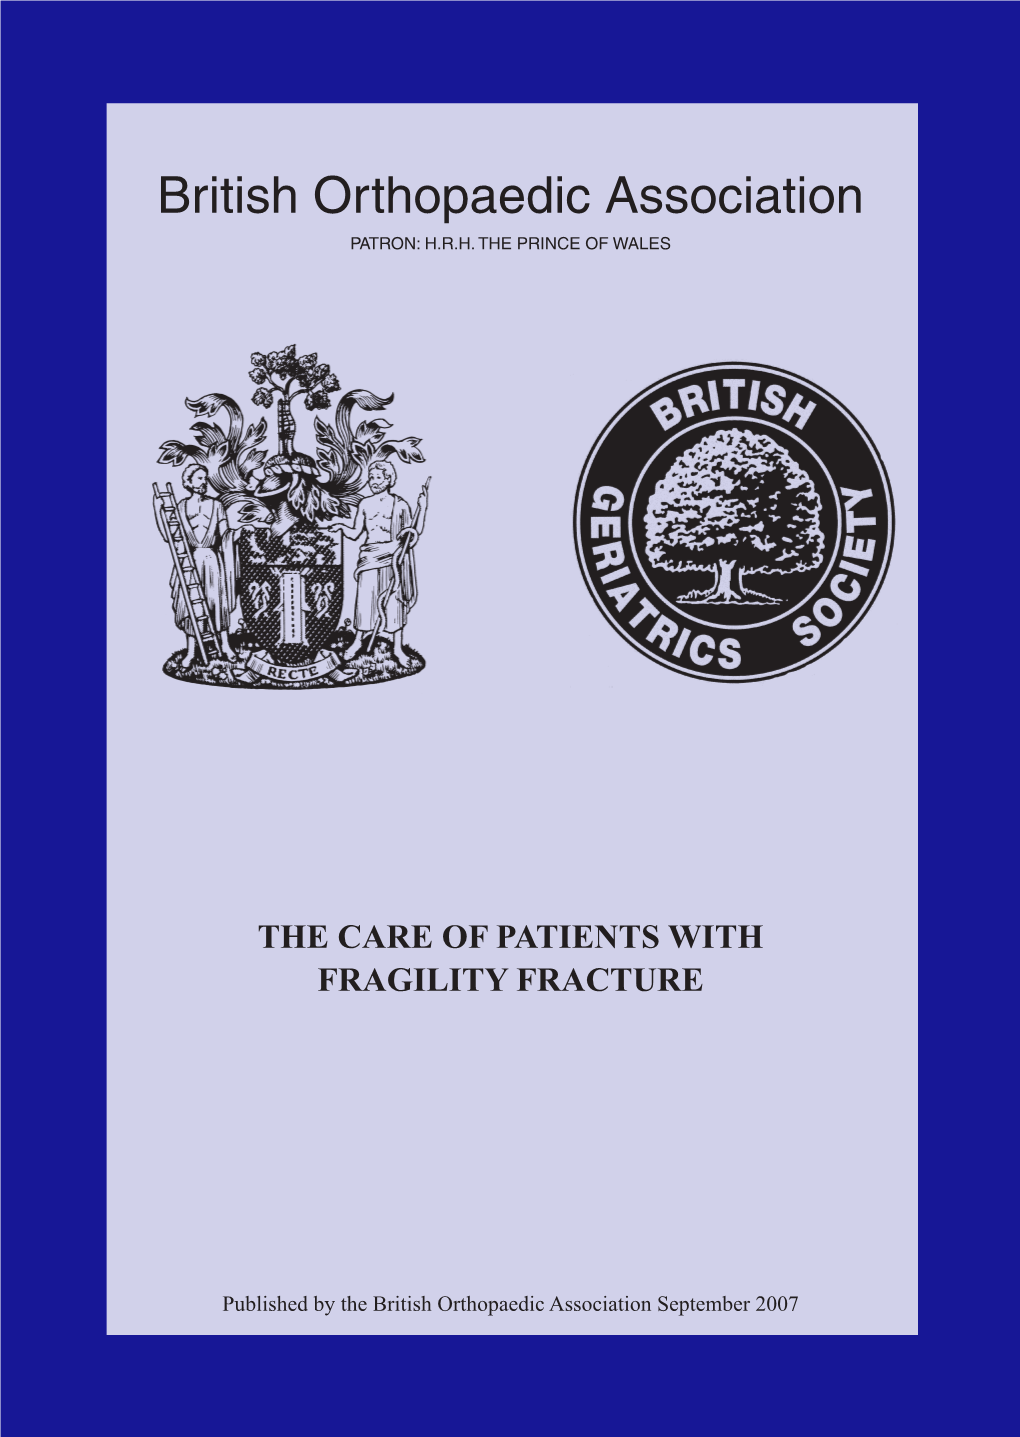 Blue Book on Fragility Fracture Care